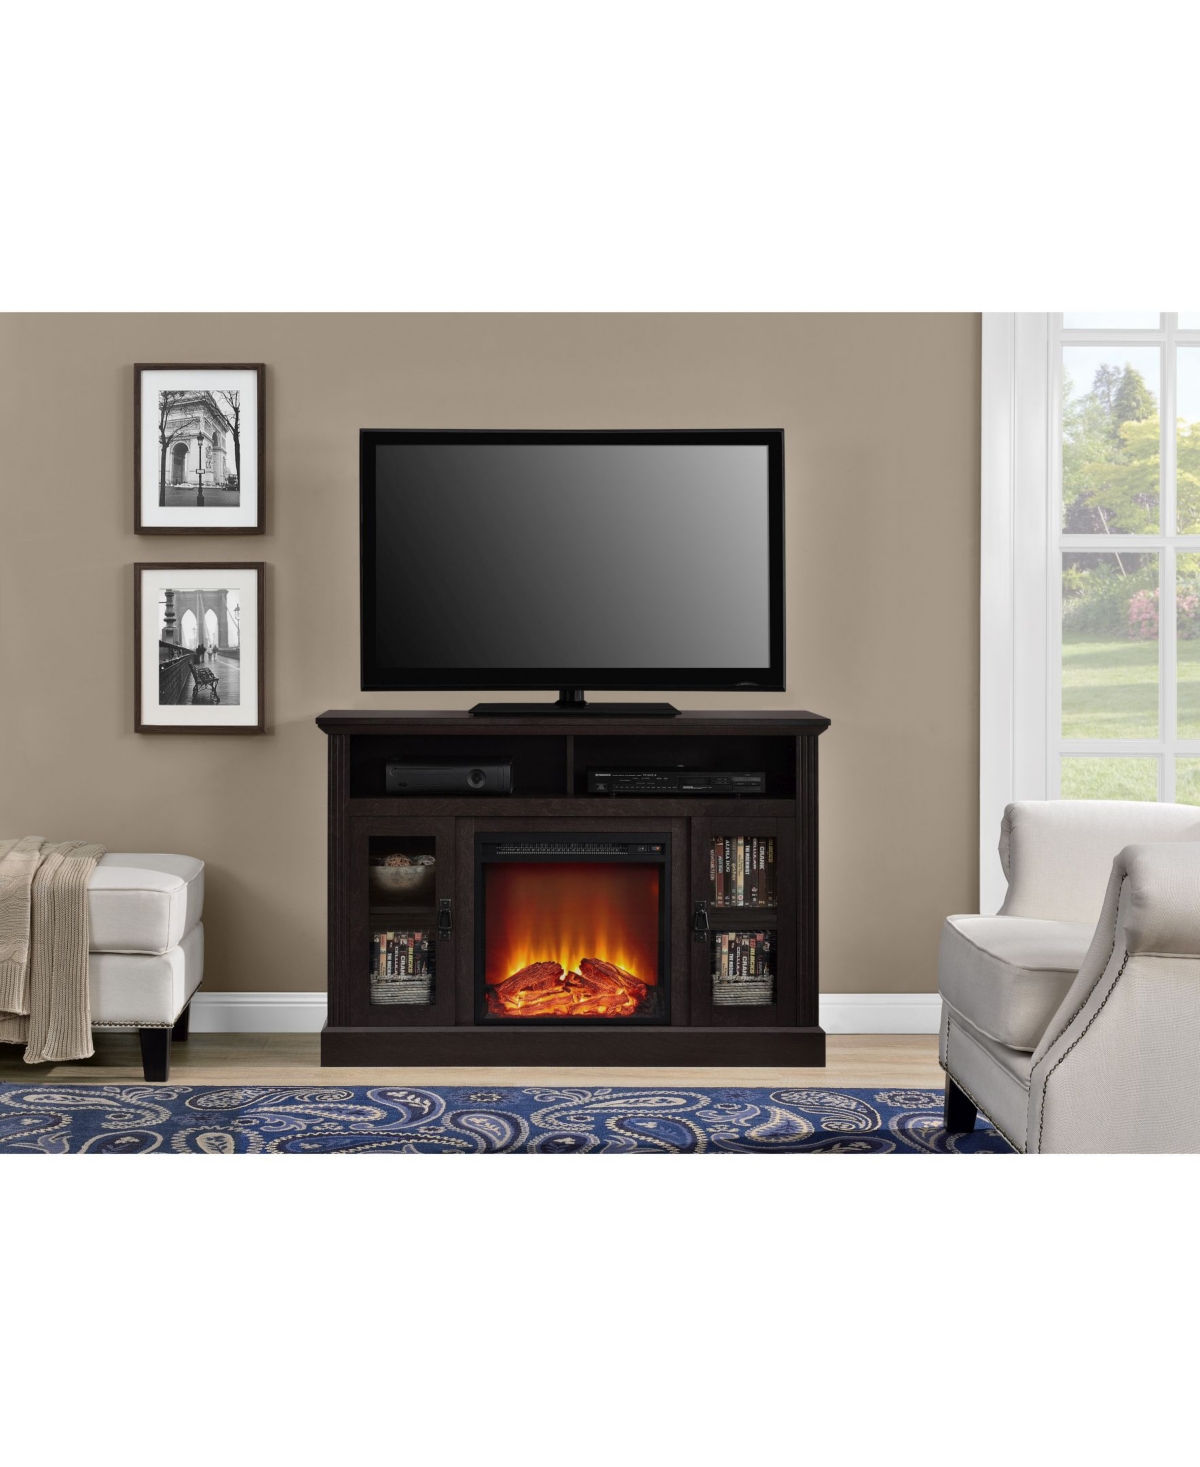 Ameriwood Home Tacoma Electric Fireplace Tv Console For Tvs Up To 50 Inches